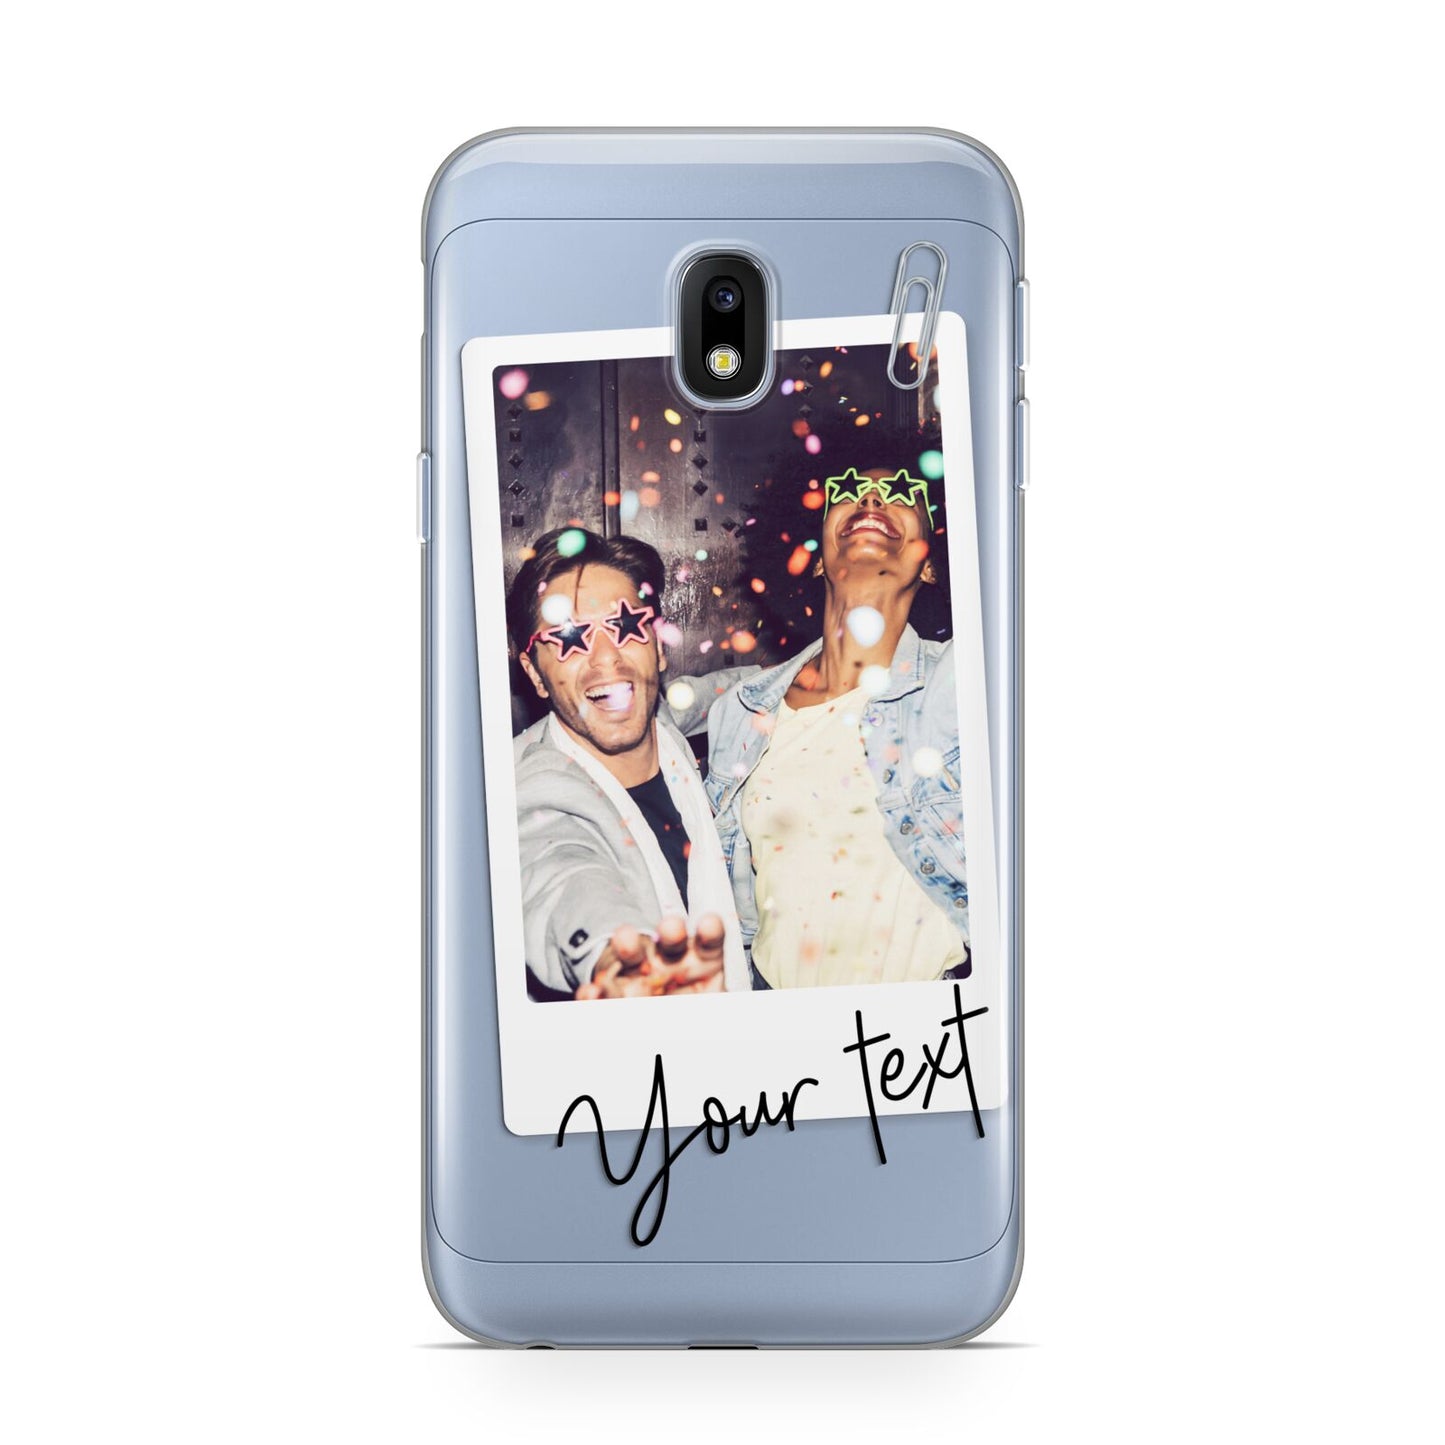 Personalised Photo with Text Samsung Galaxy J3 2017 Case